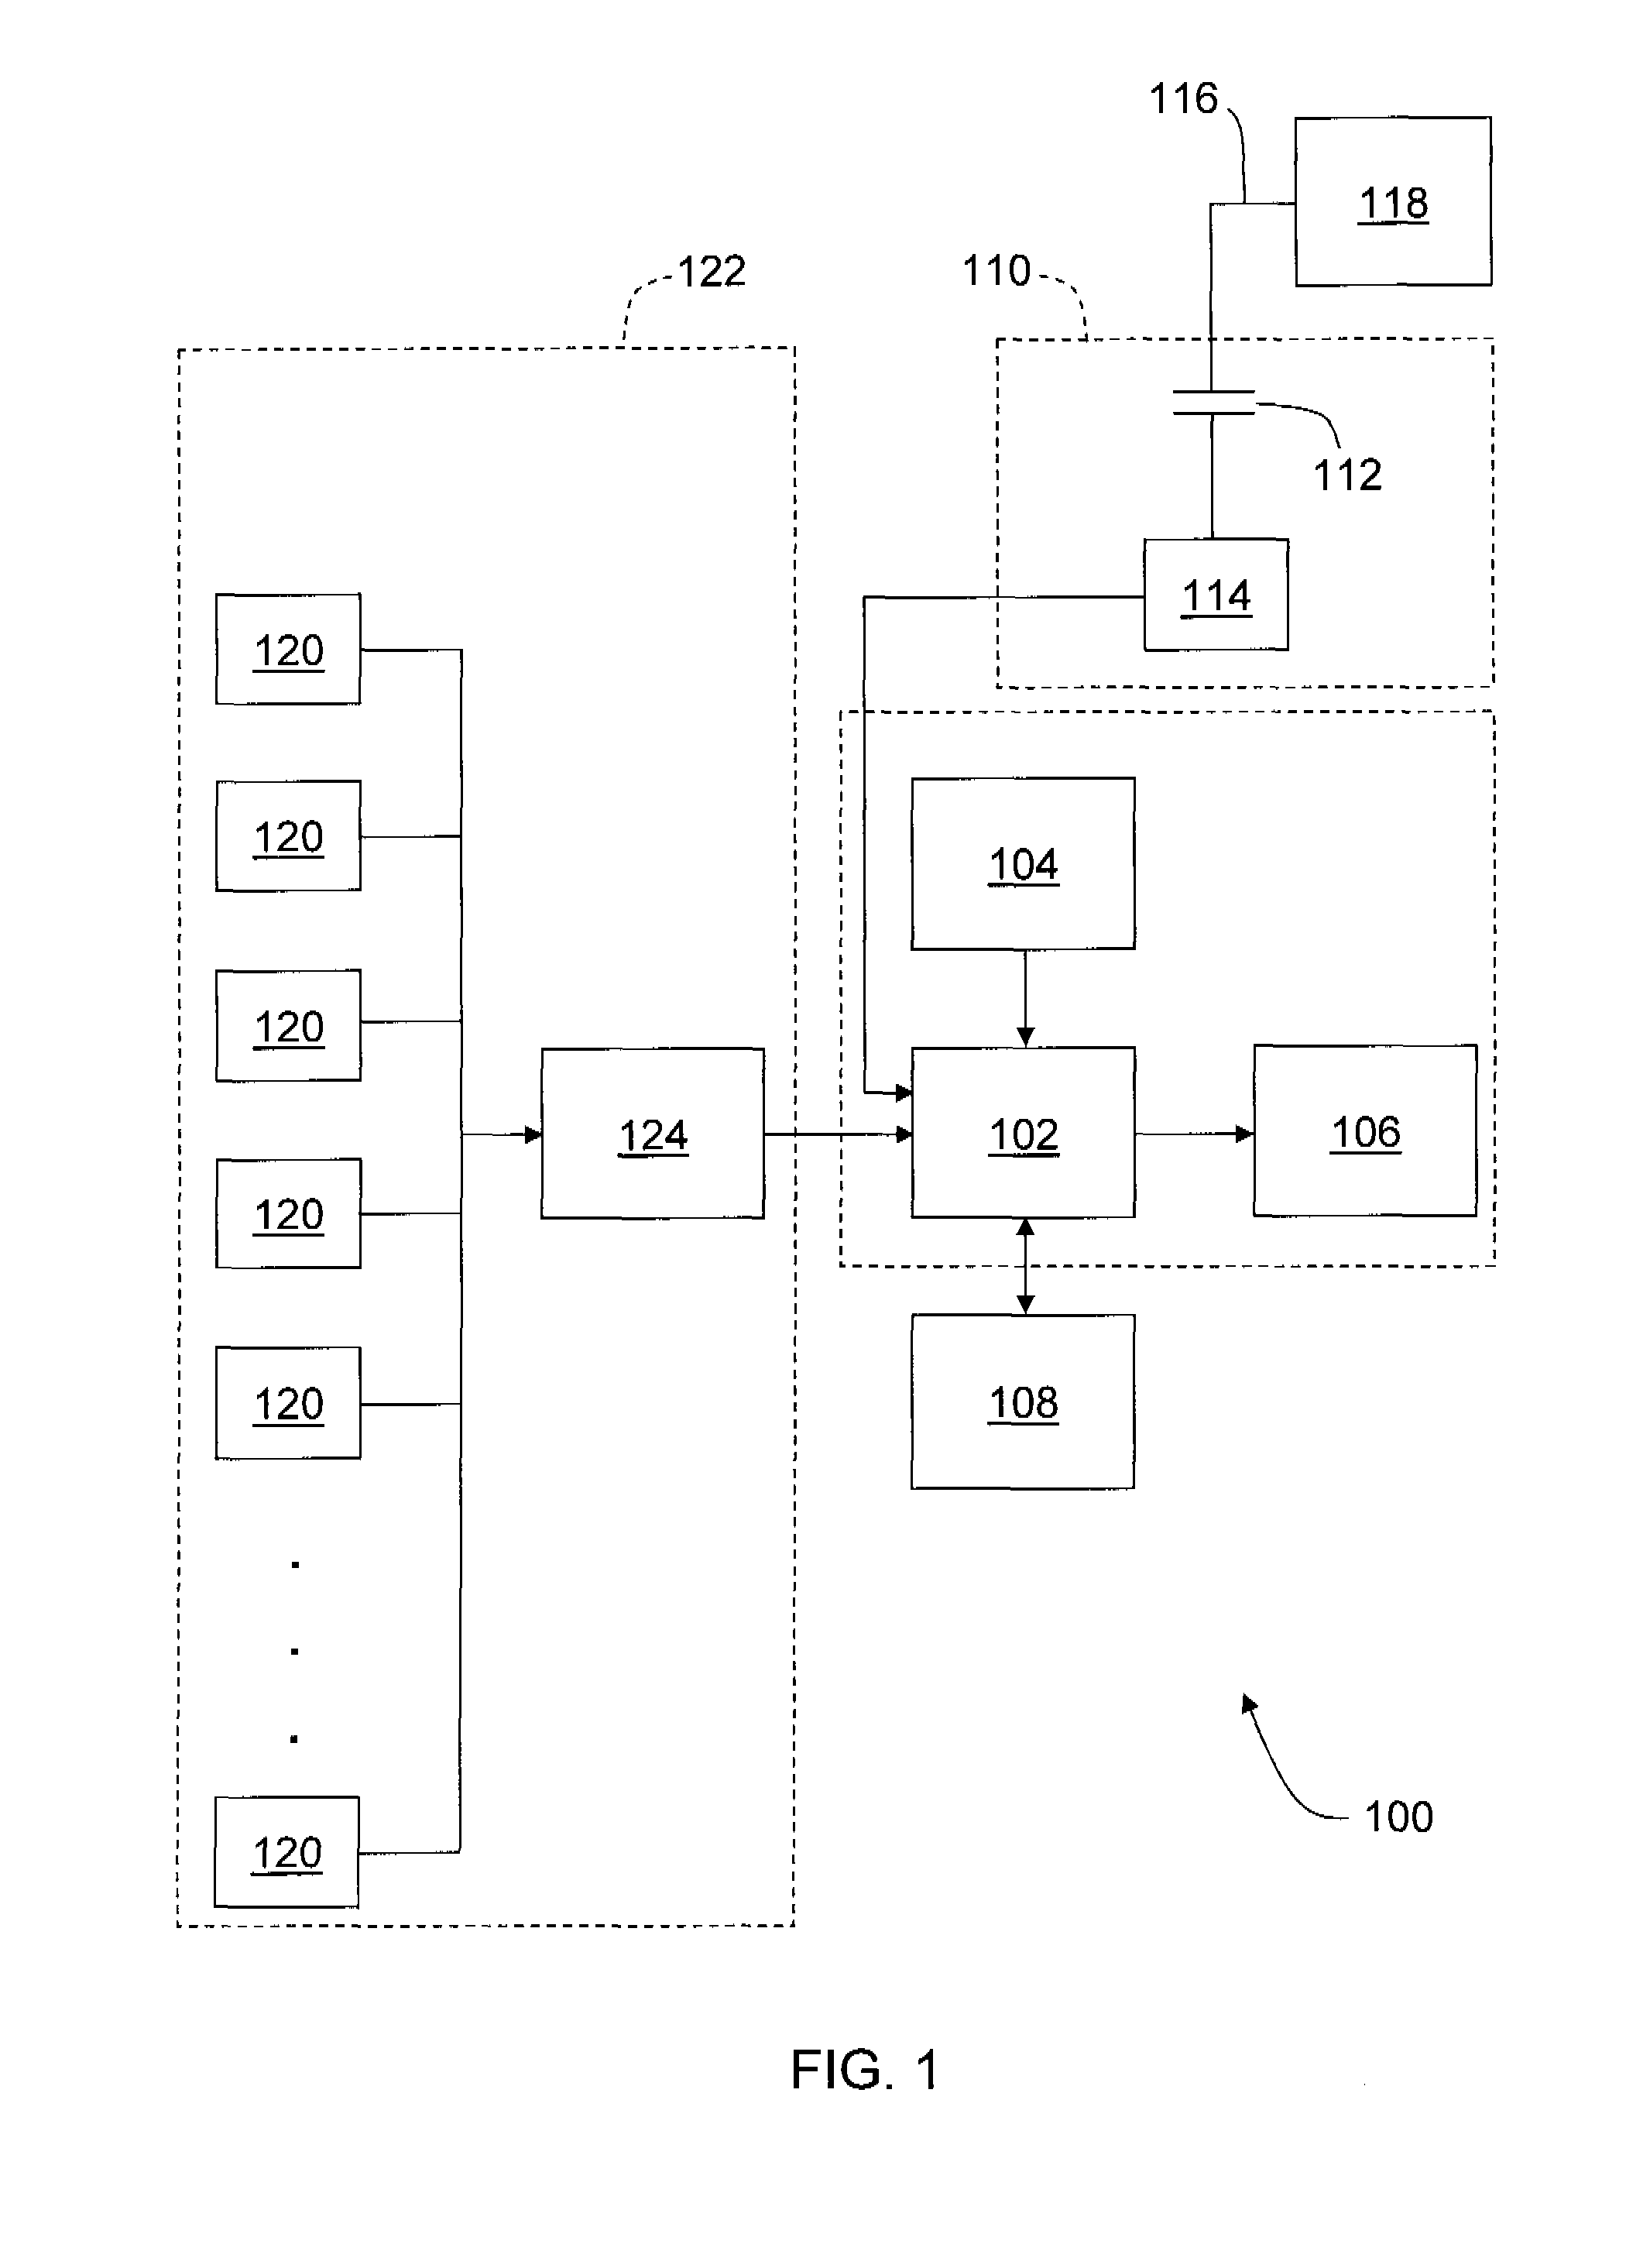 Methods and apparatus for analyzing partial discharge in electrical machinery